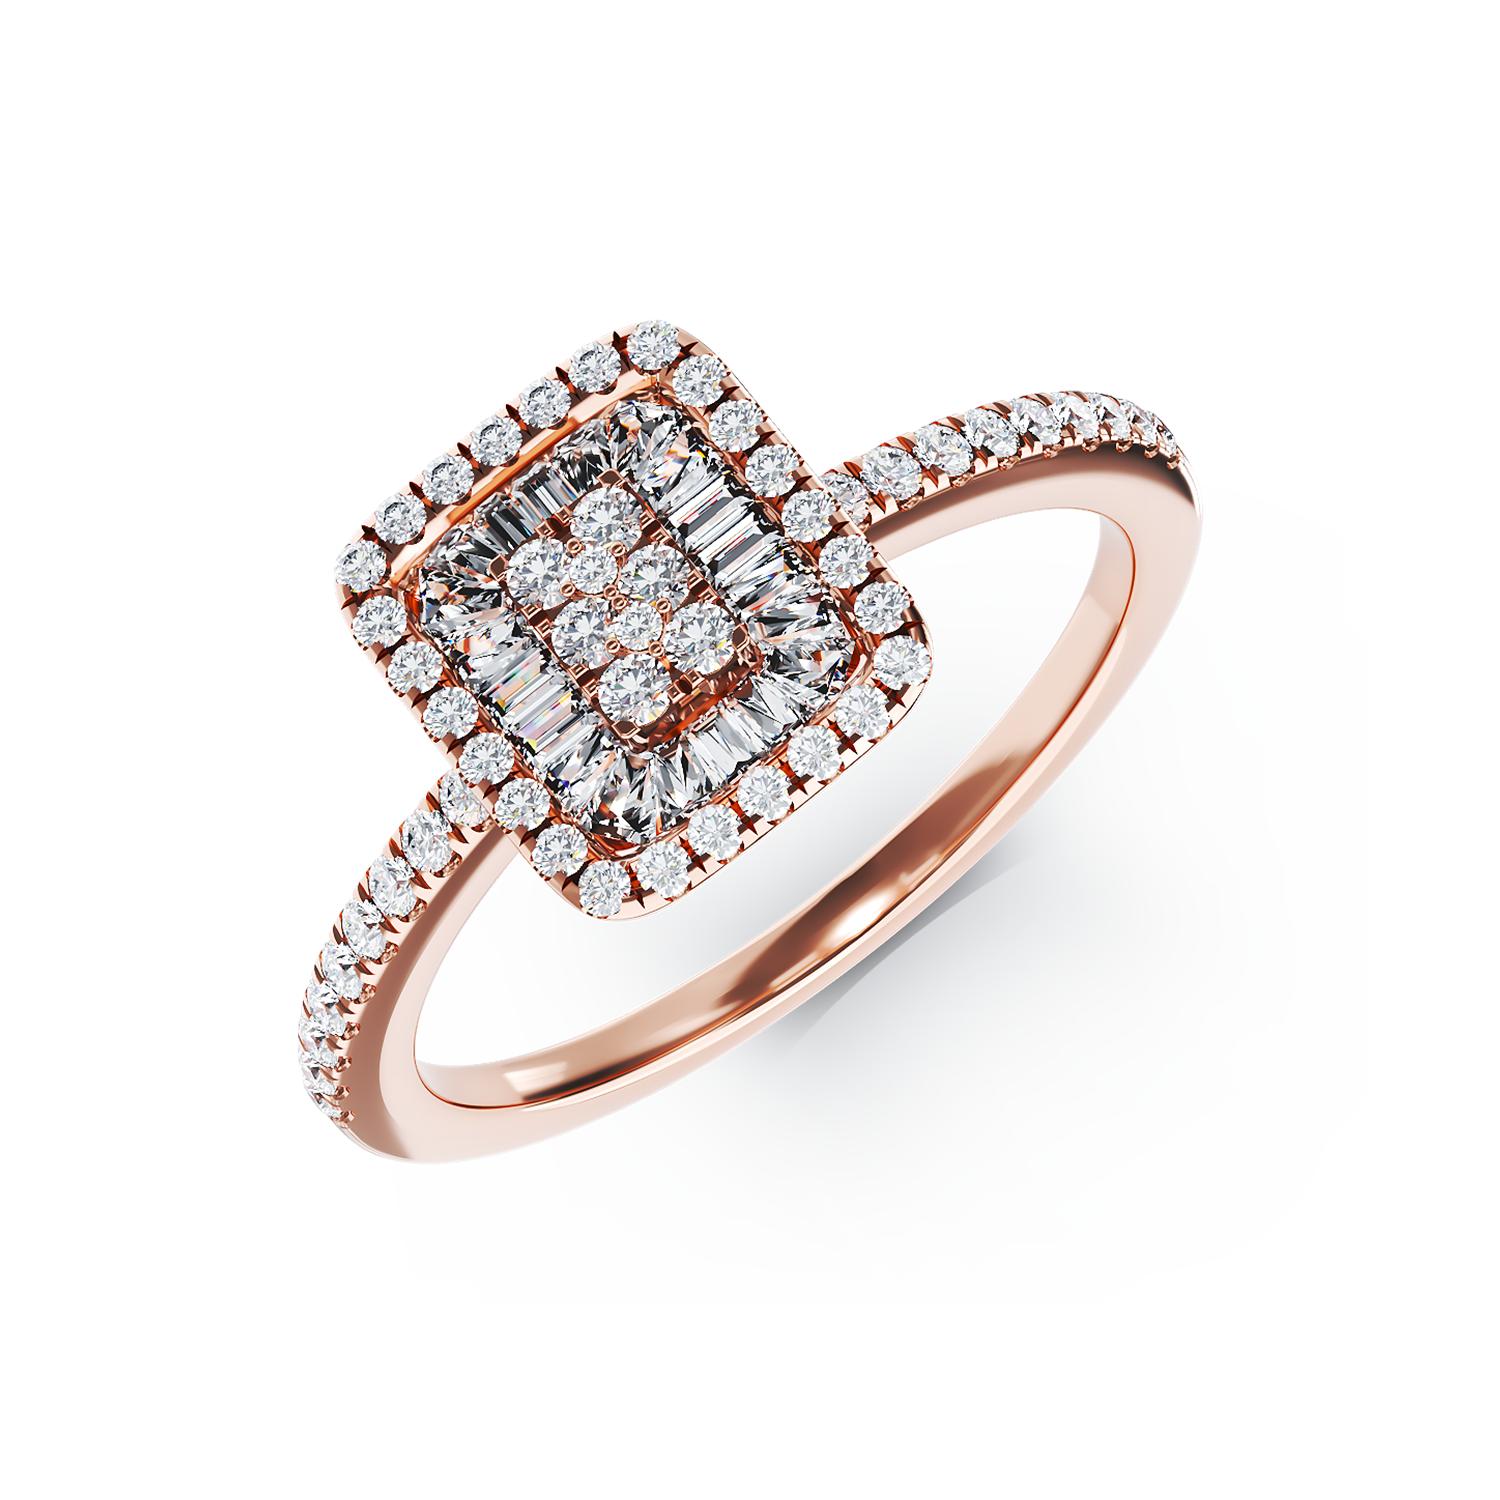 18K rose gold engagement ring with 0.28ct diamonds